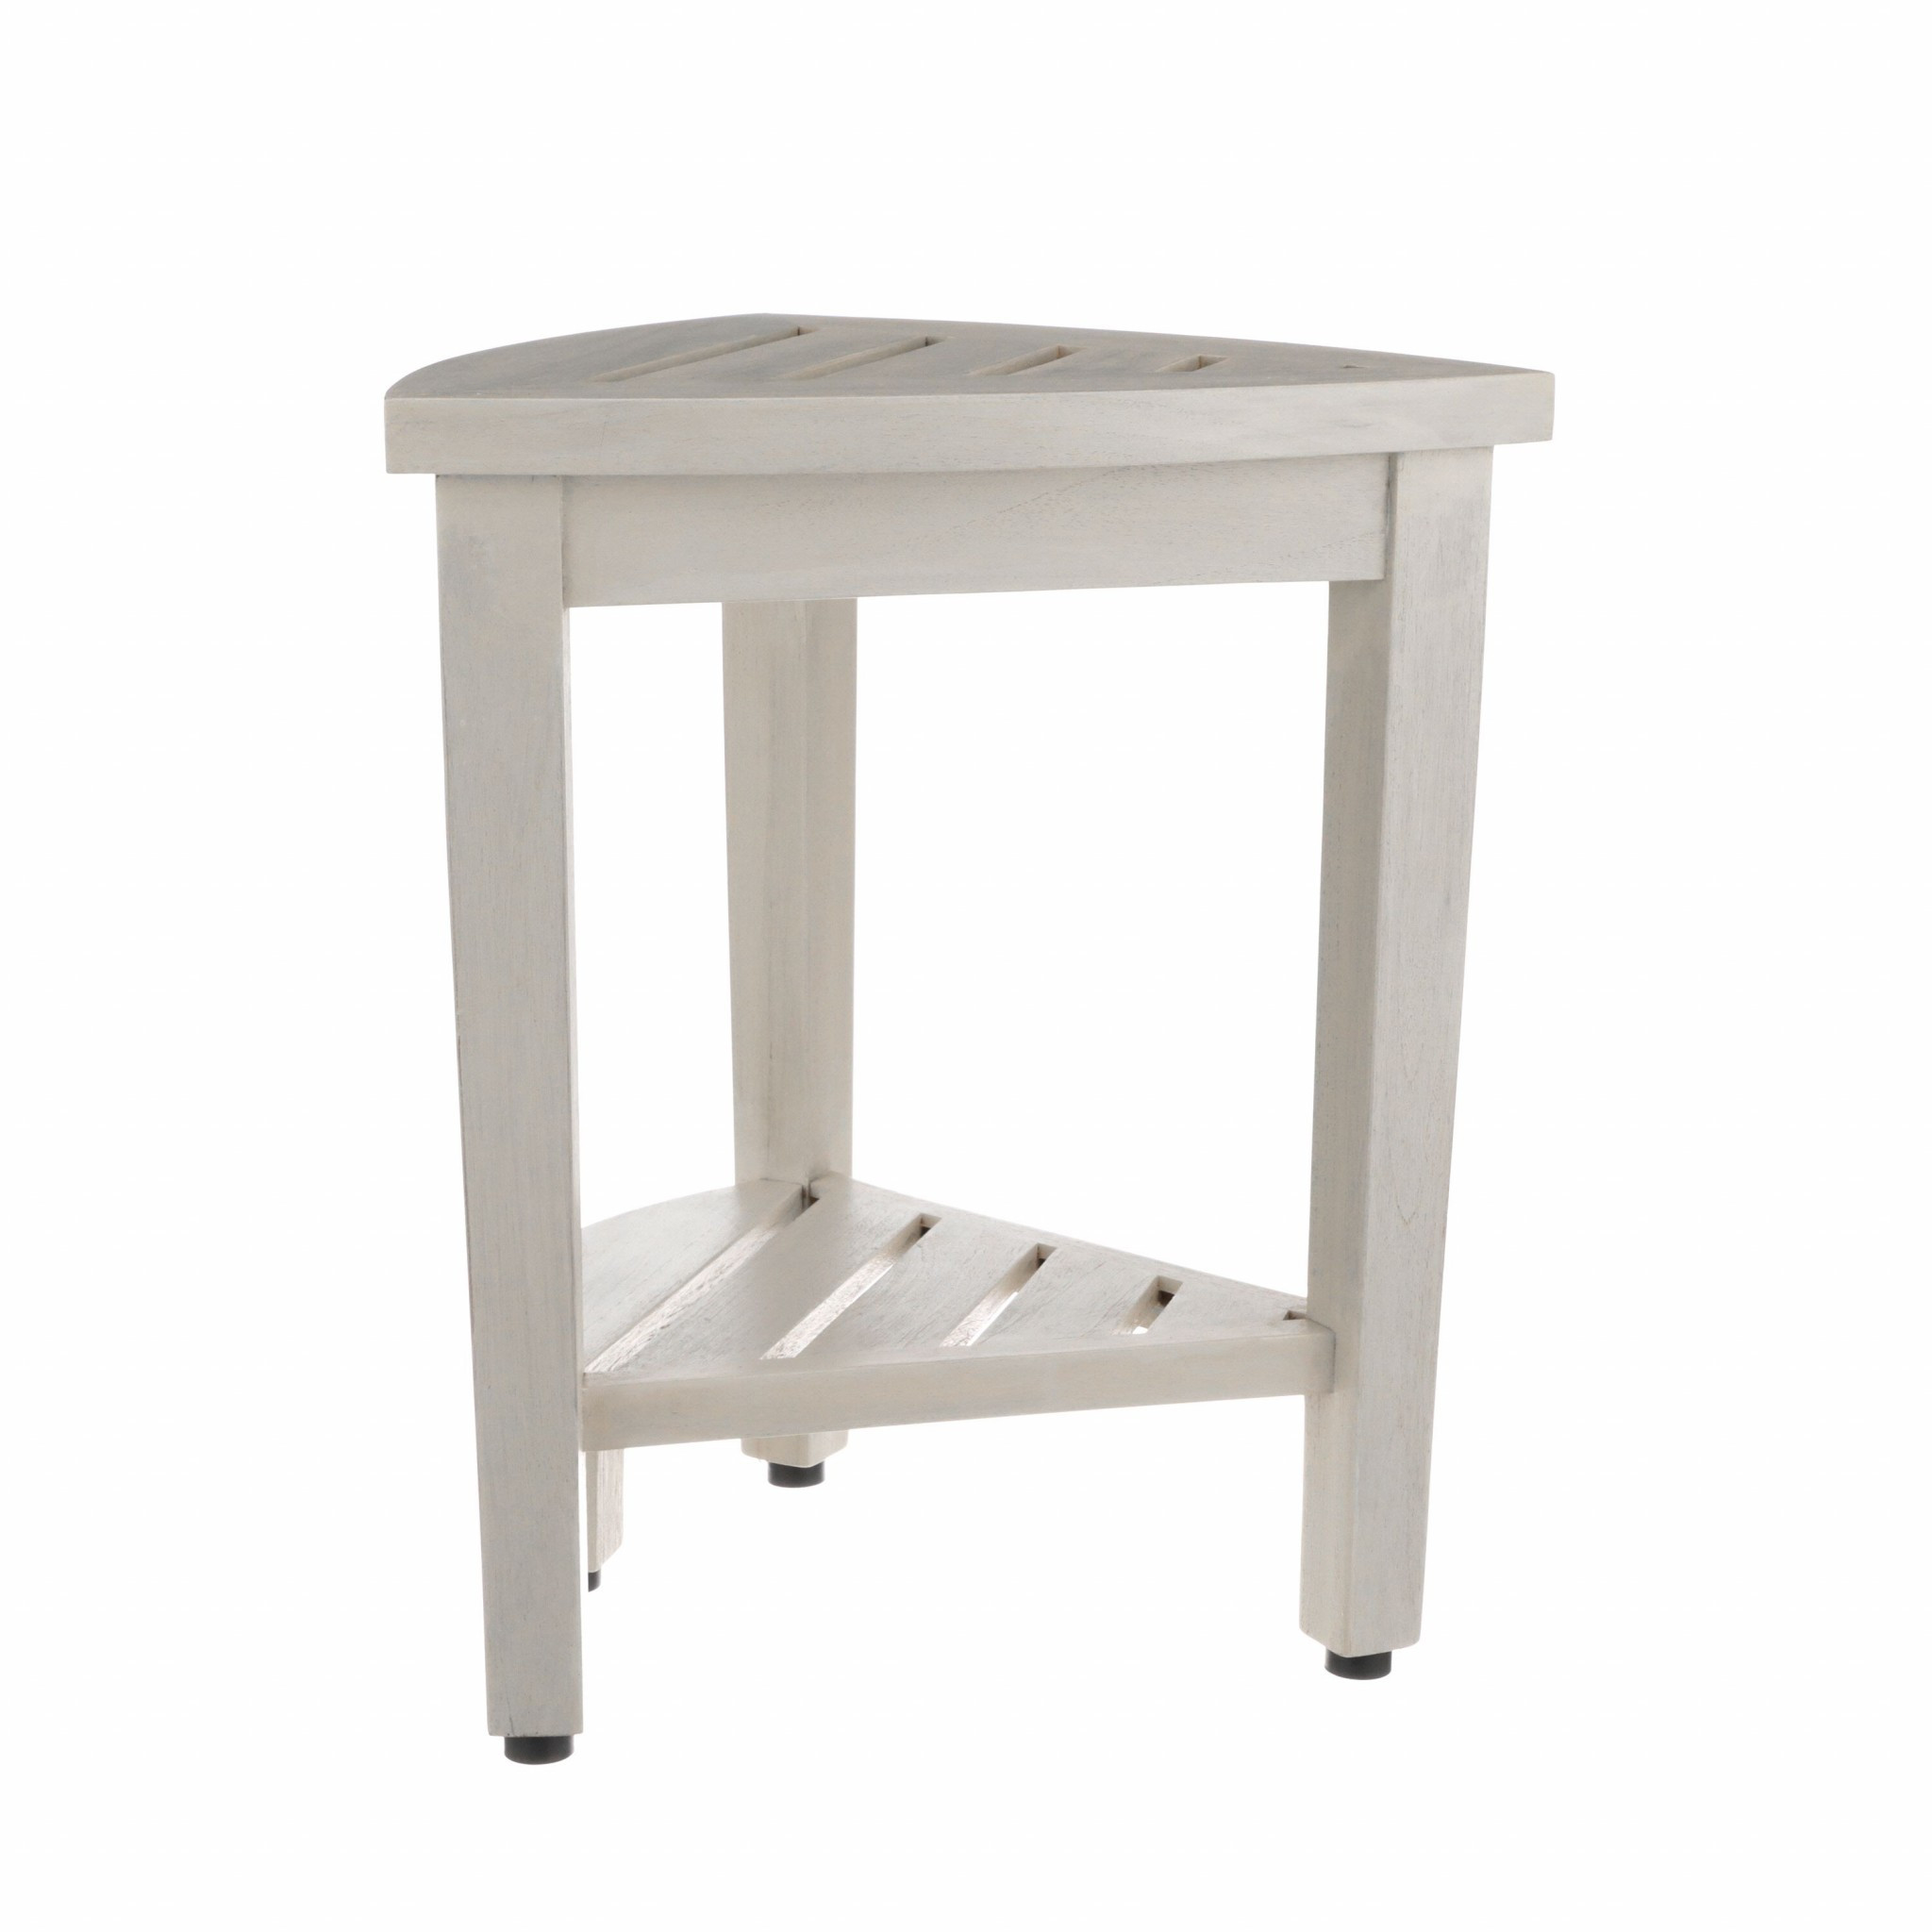 Compact Teak Shower Stool with Arms in Whitewash Finish